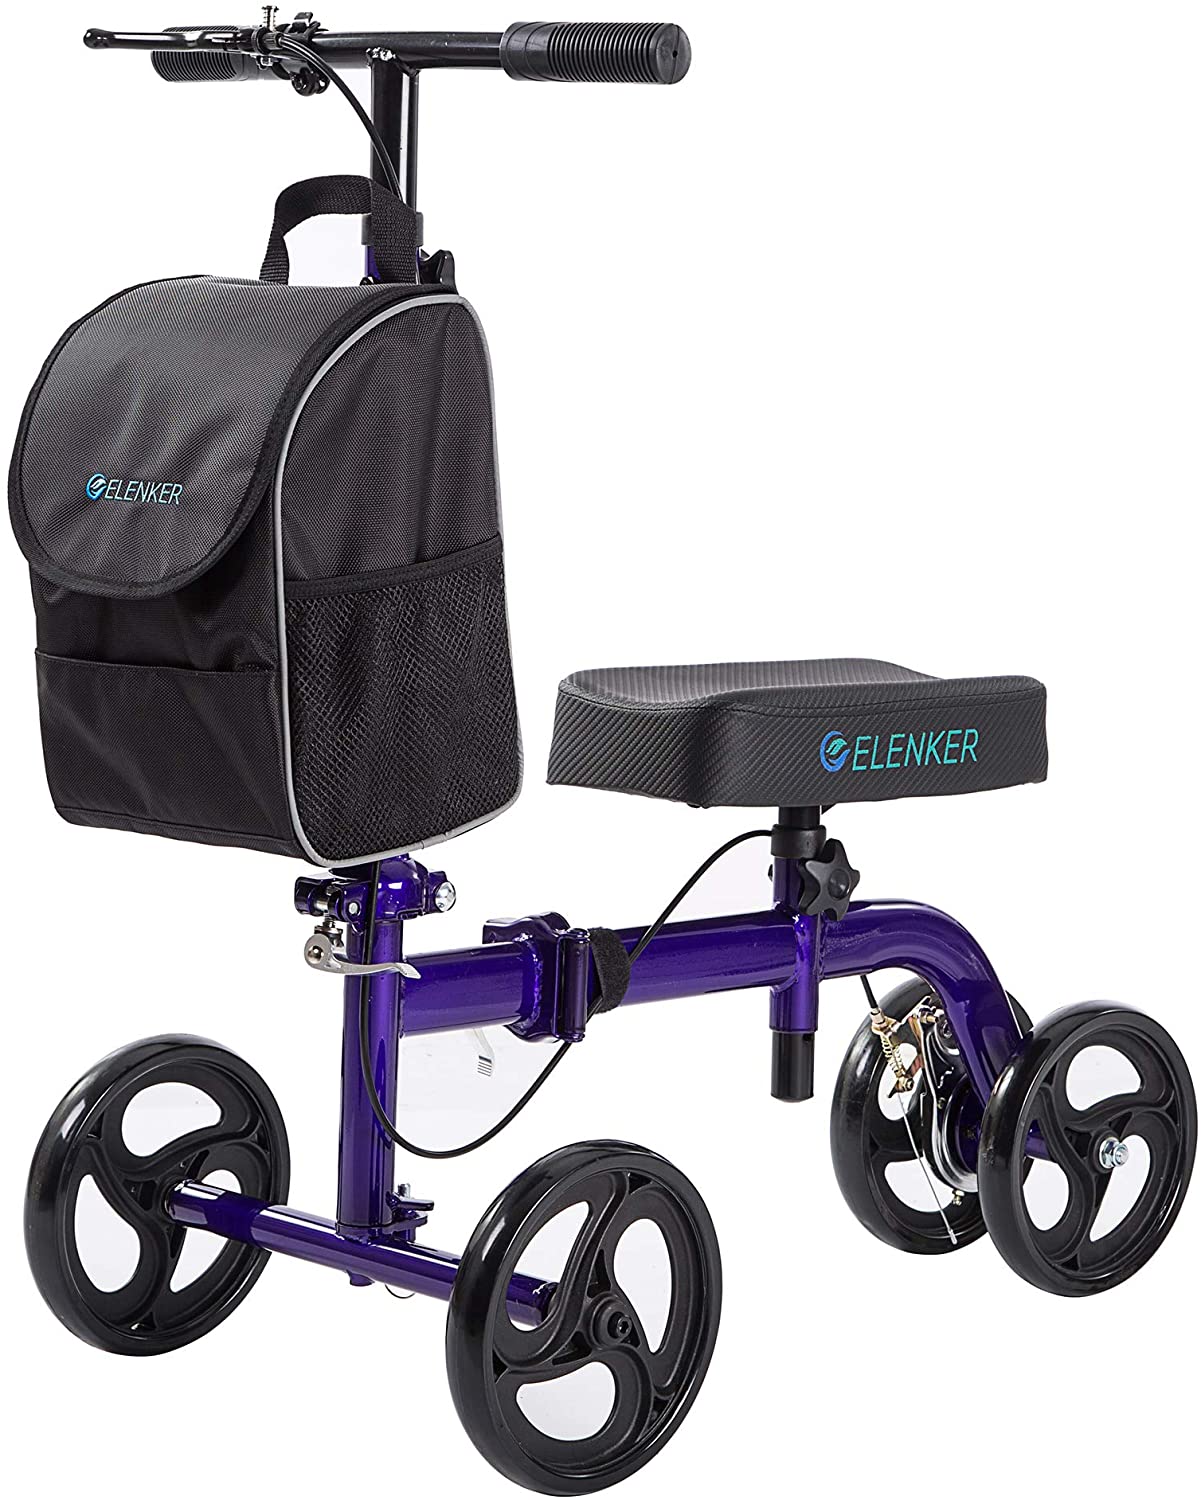 HFK-9270 ELENKER?  Steerable Knee Scooter for Foot Injuries Ankles Surgery with Comfortable Soft Knee Pad and Multifunctional Indigo Refurbished